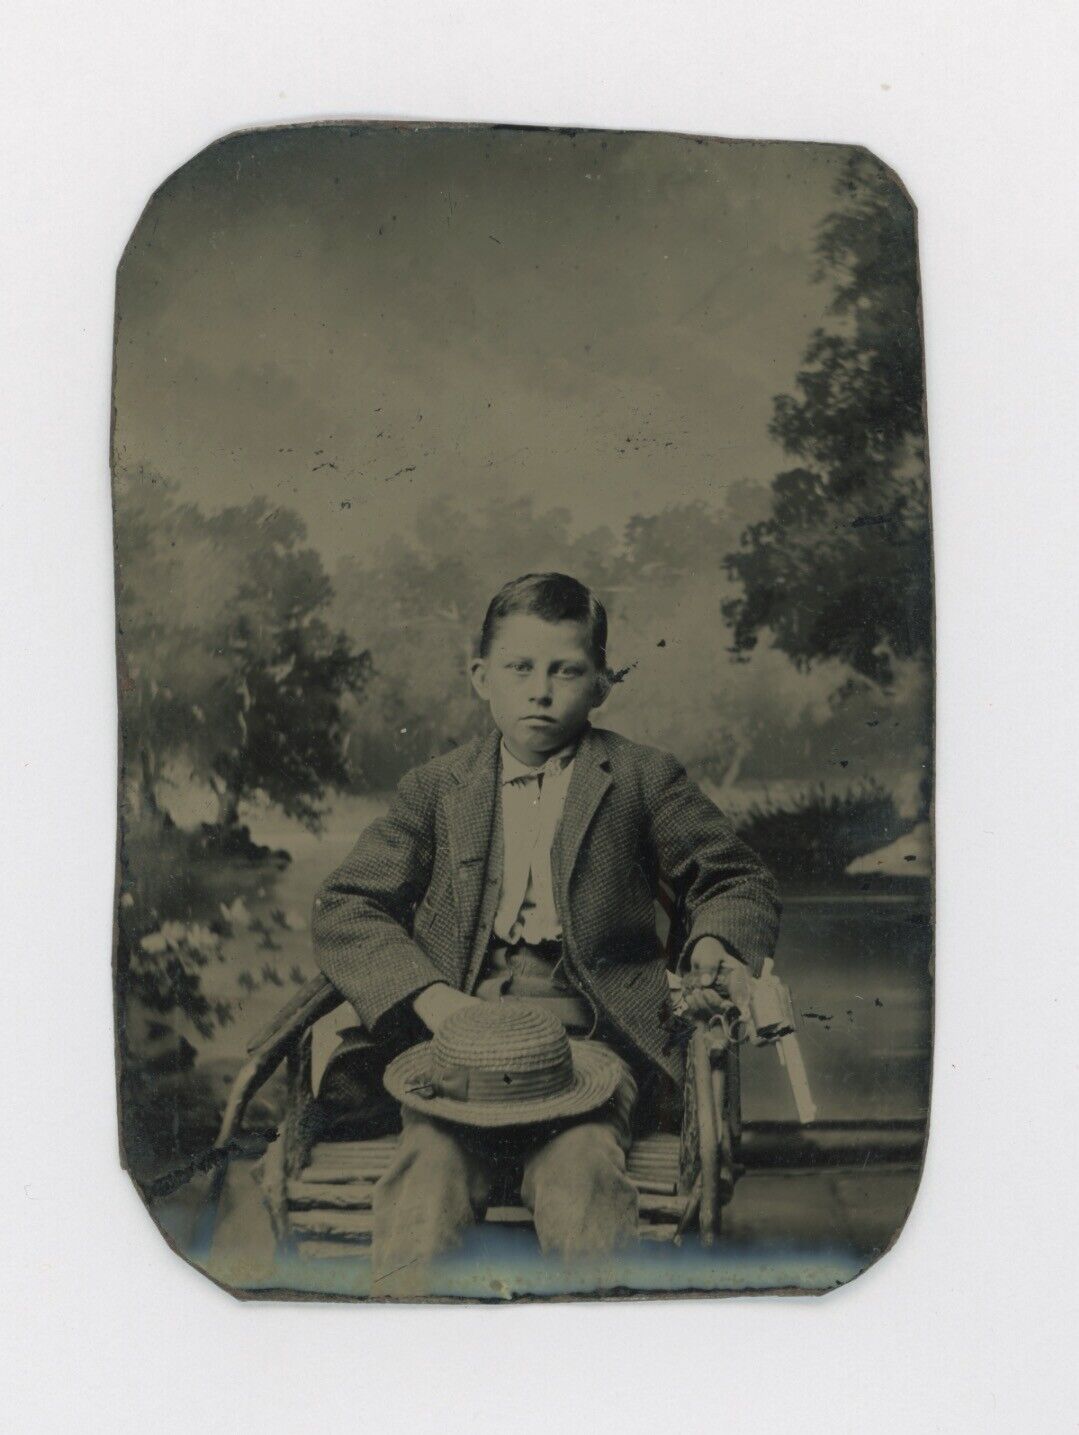 Ca. 1870's-1880's TINTYPE SERIOUS LOOKING BOY HOLDING A REAL SIX GUN PISTOL